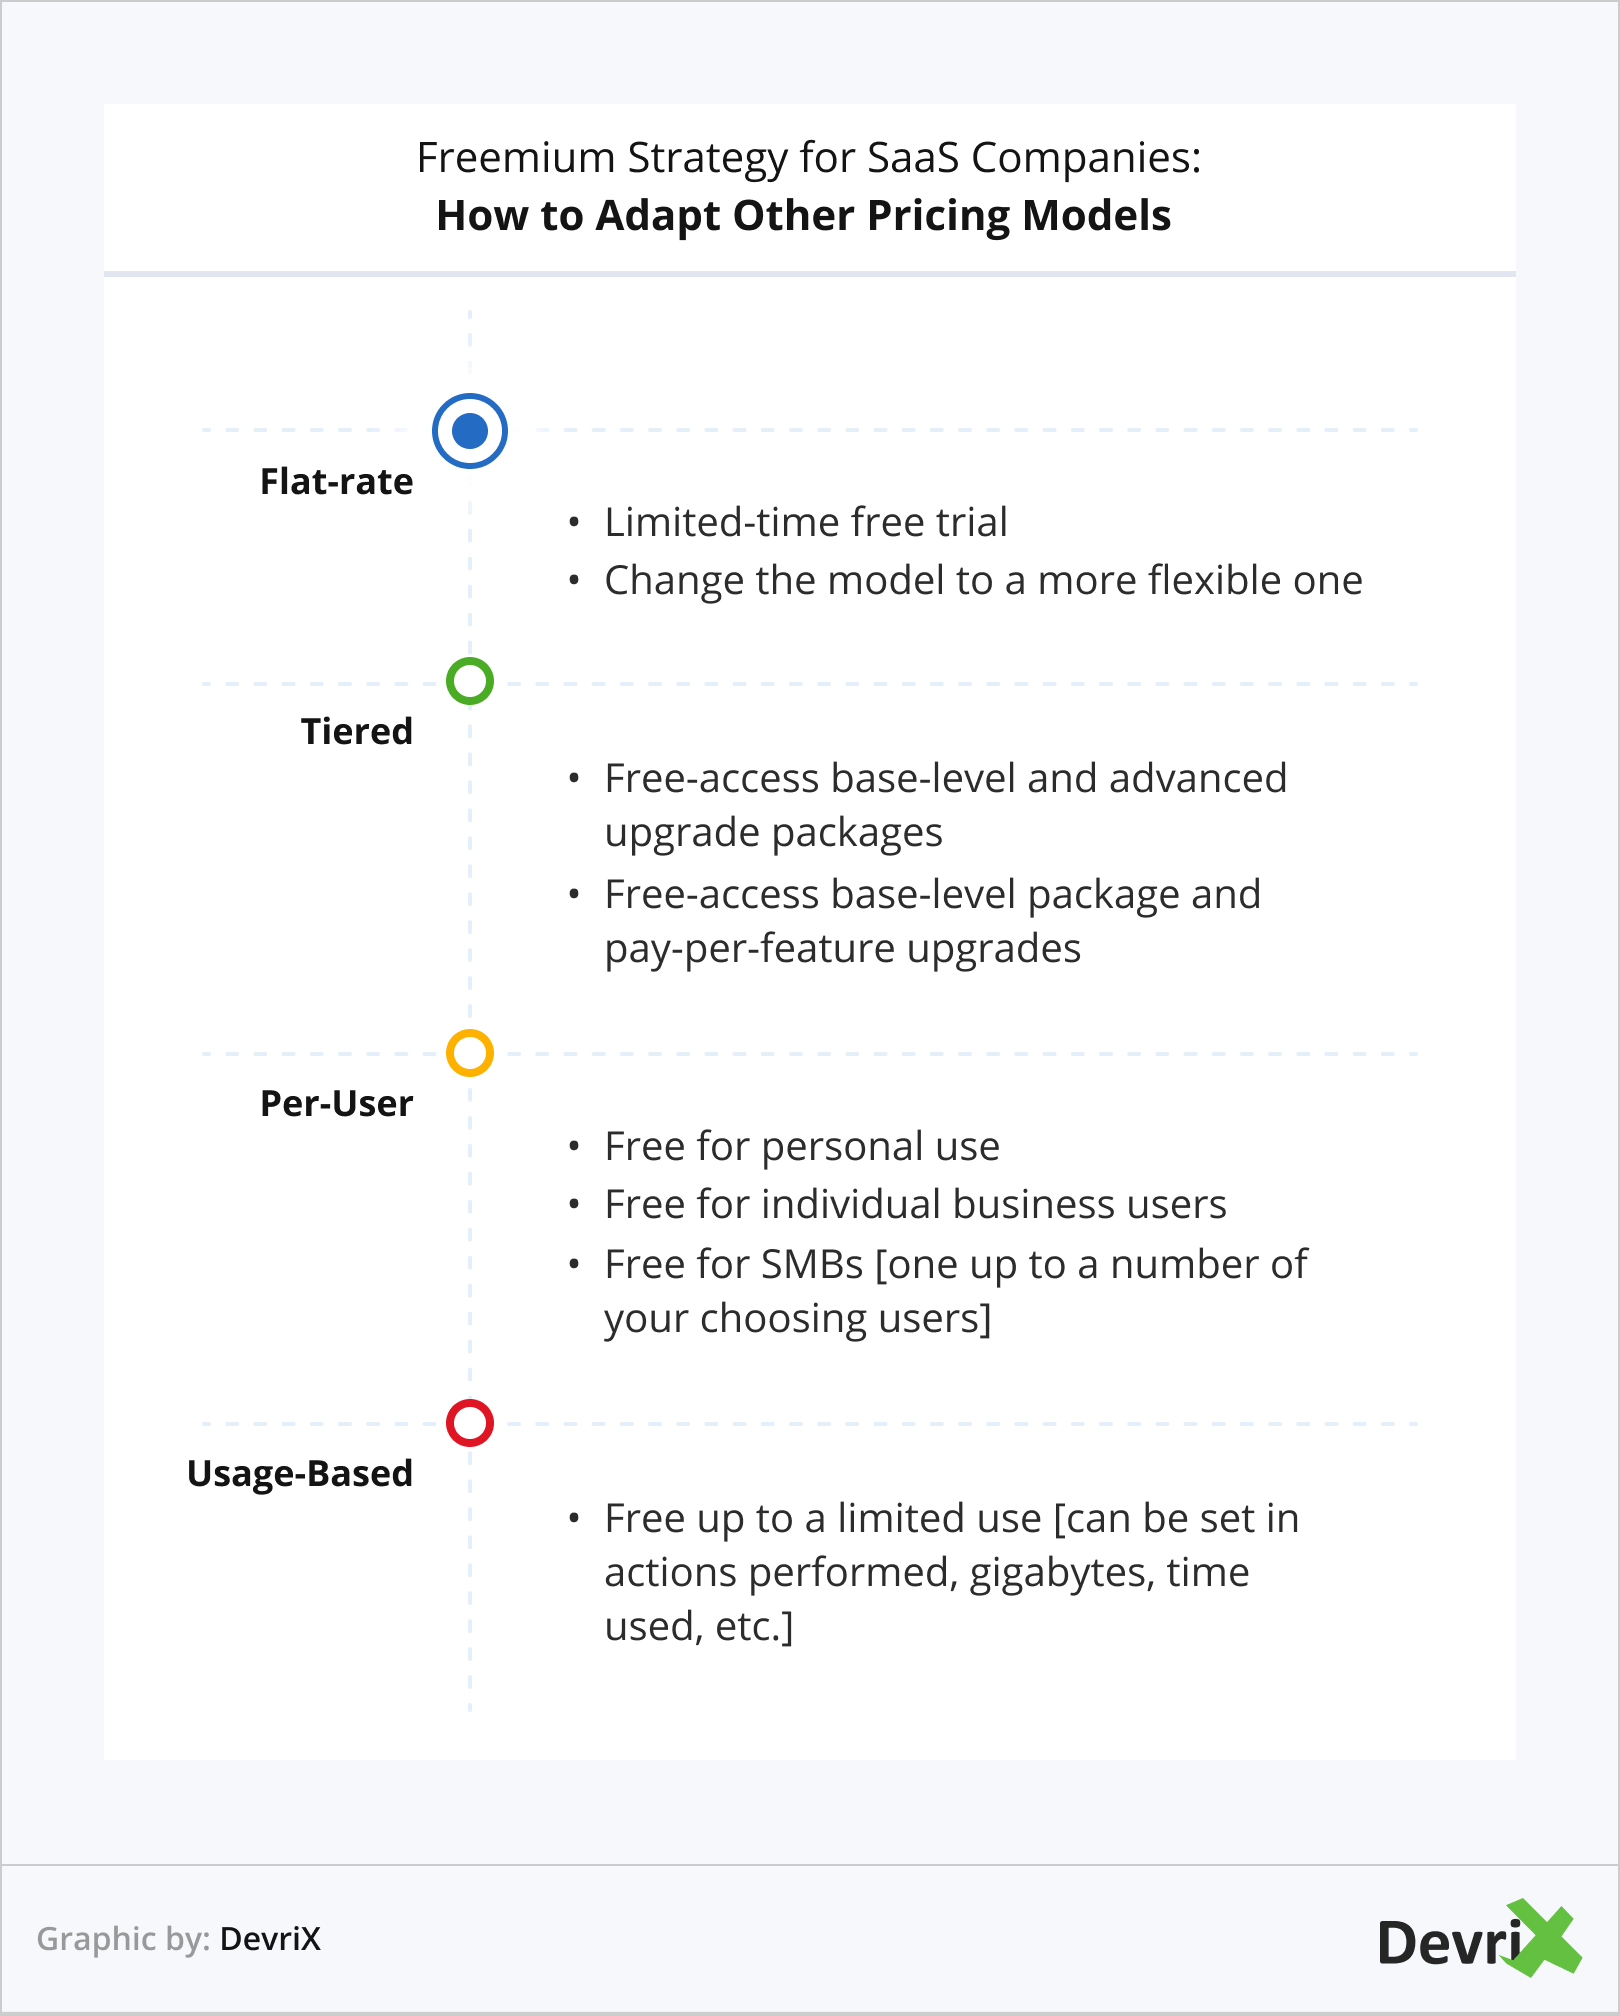 Freemium Strategy for SaaS Companies_ How to Adapt Other Pricing Models